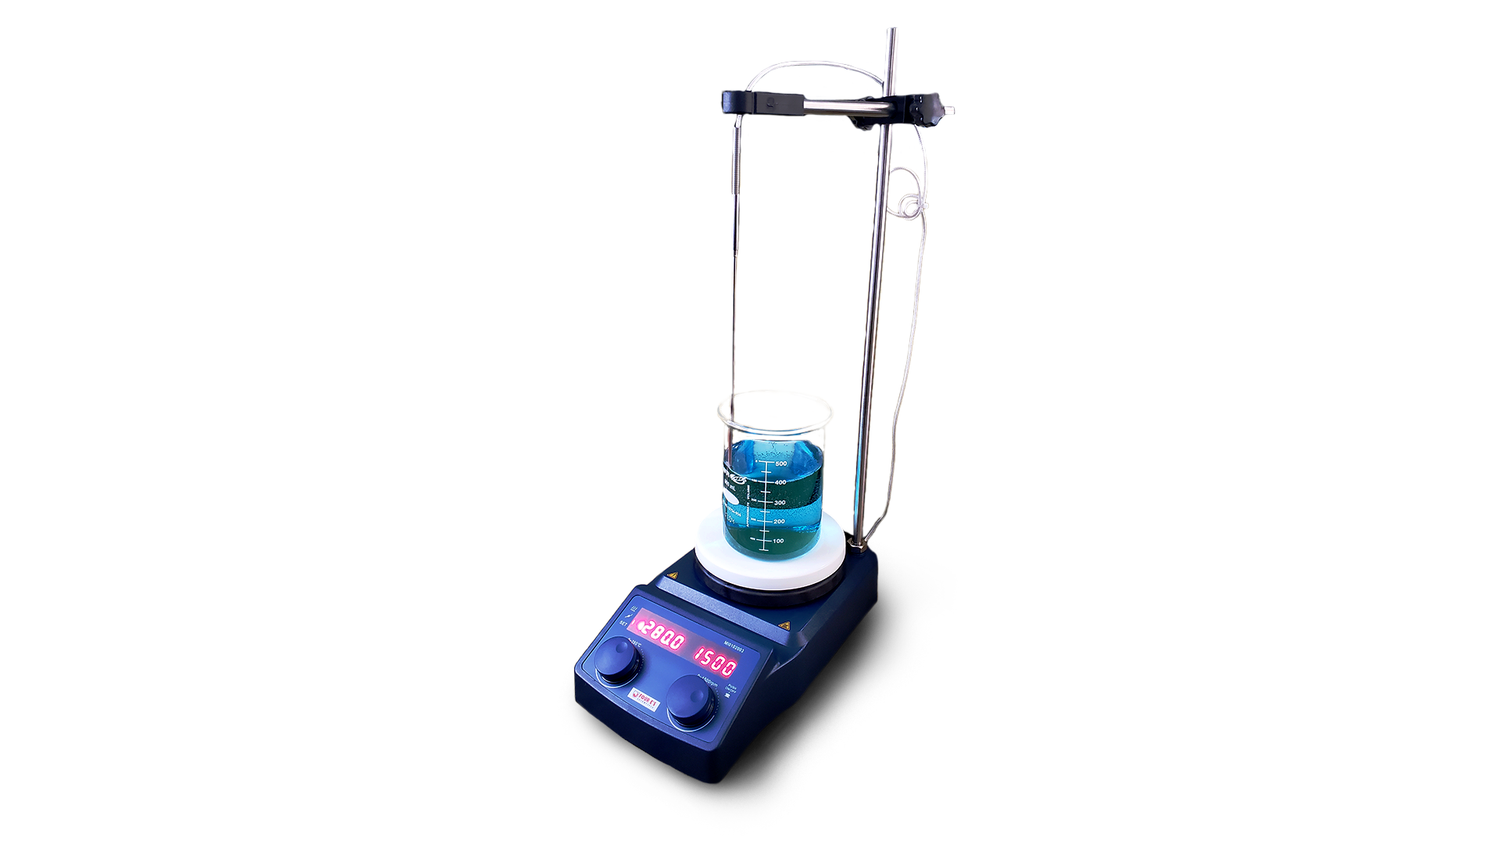 Blue LED Digital Magnetic Hotplate Stirrer with Accessories and Glassware